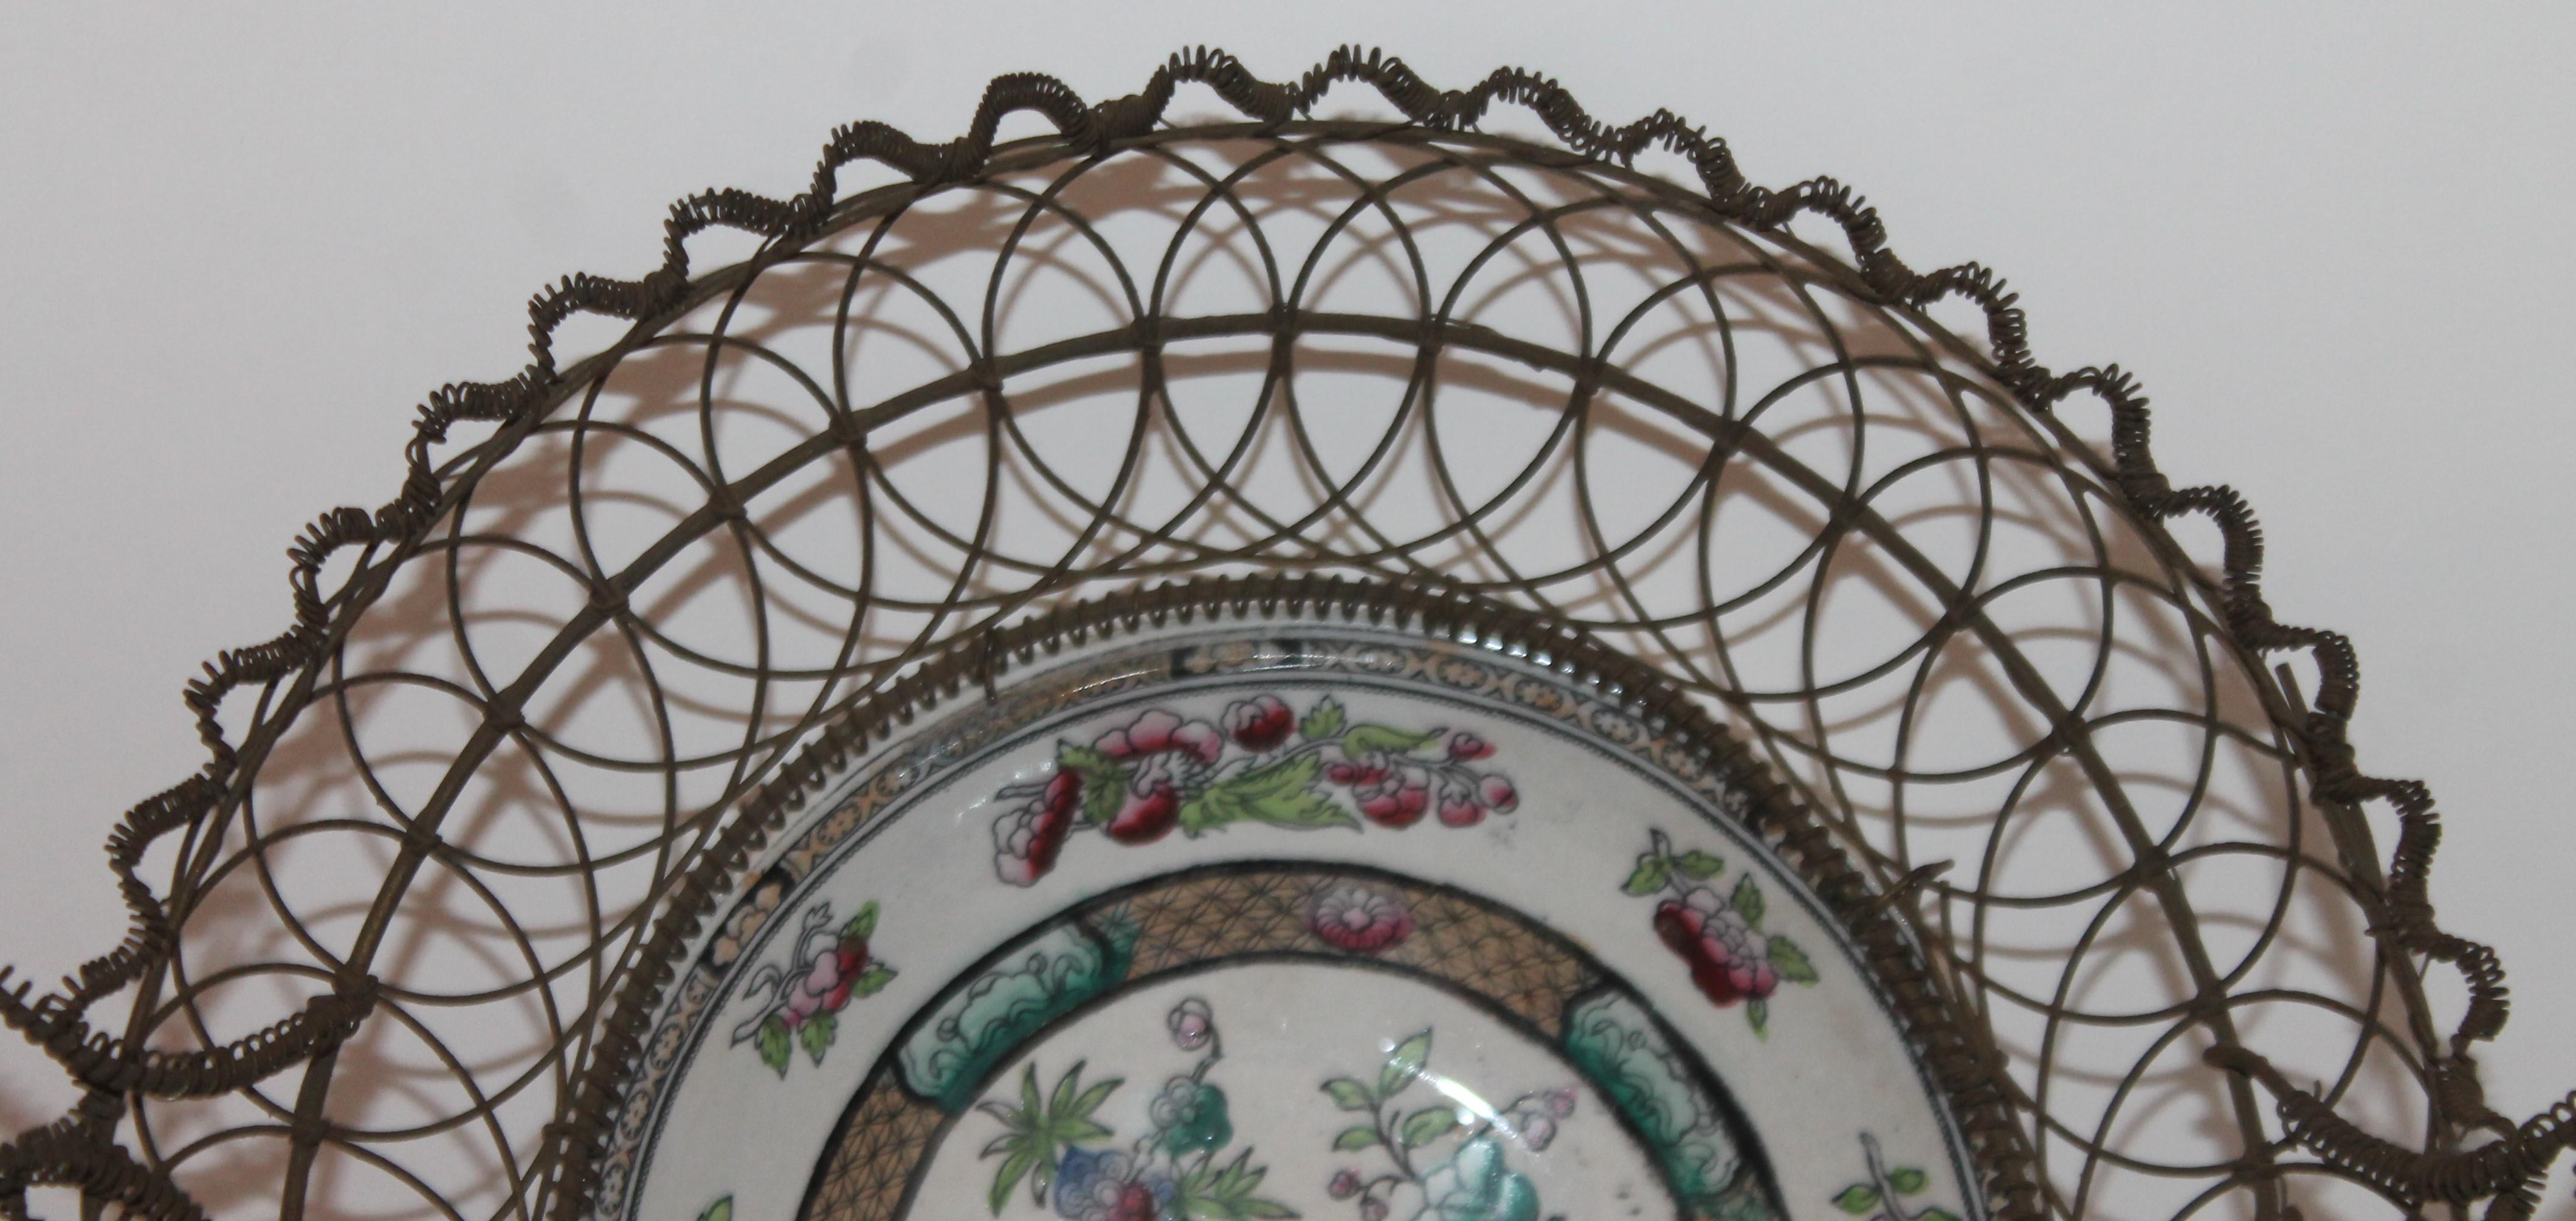 Edge. Malkin & Co standard printed trade mark used circa 1871-1891
Handmade 19th century wire basket with handles with a inserted bowl. Everything is in very good condition.